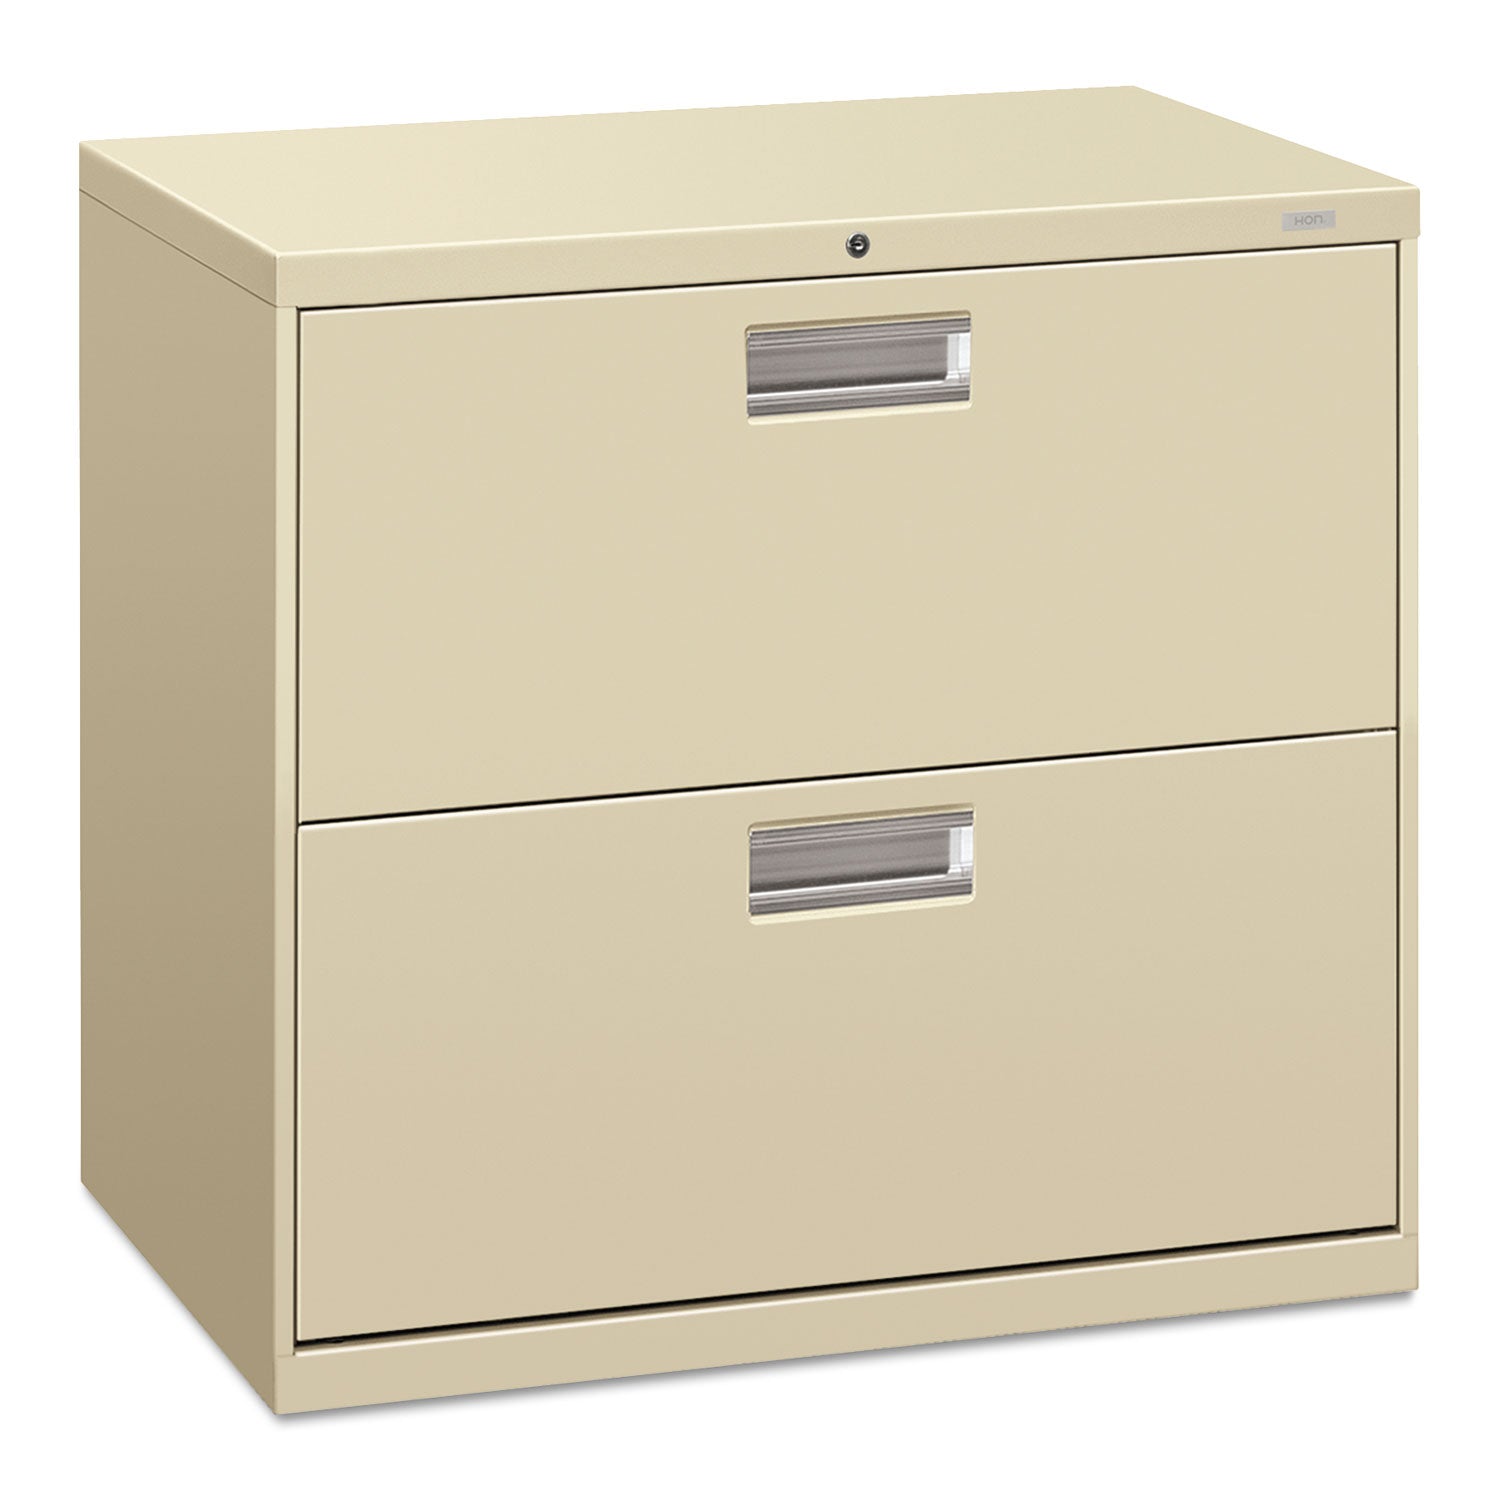 Brigade 600 Series Lateral File, 2 Legal/Letter-Size File Drawers, Putty, 30" x 18" x 28 - 